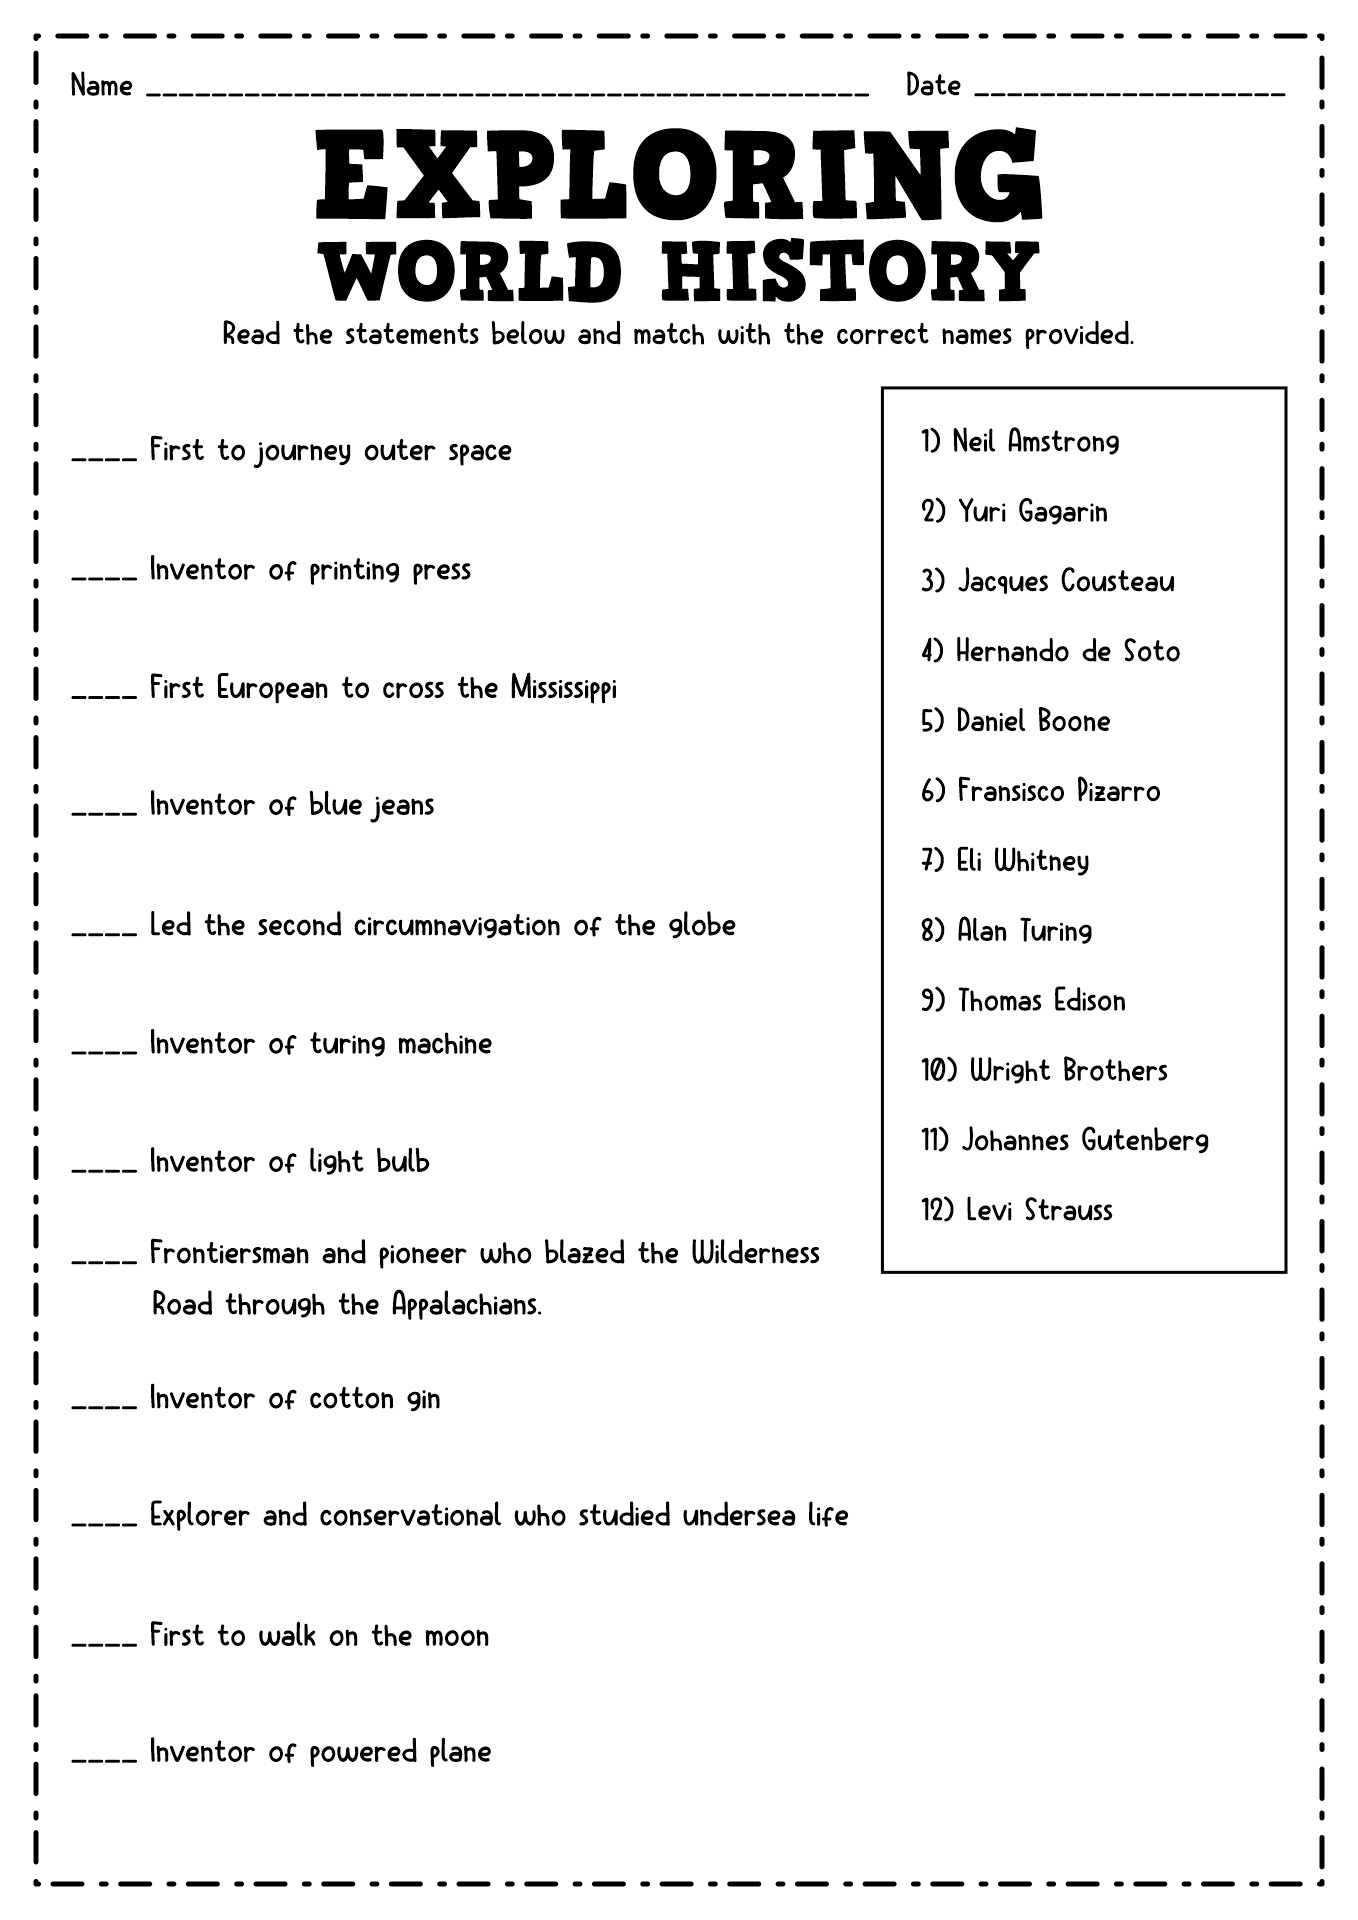 Free Printable History Worksheets For Highschool Students